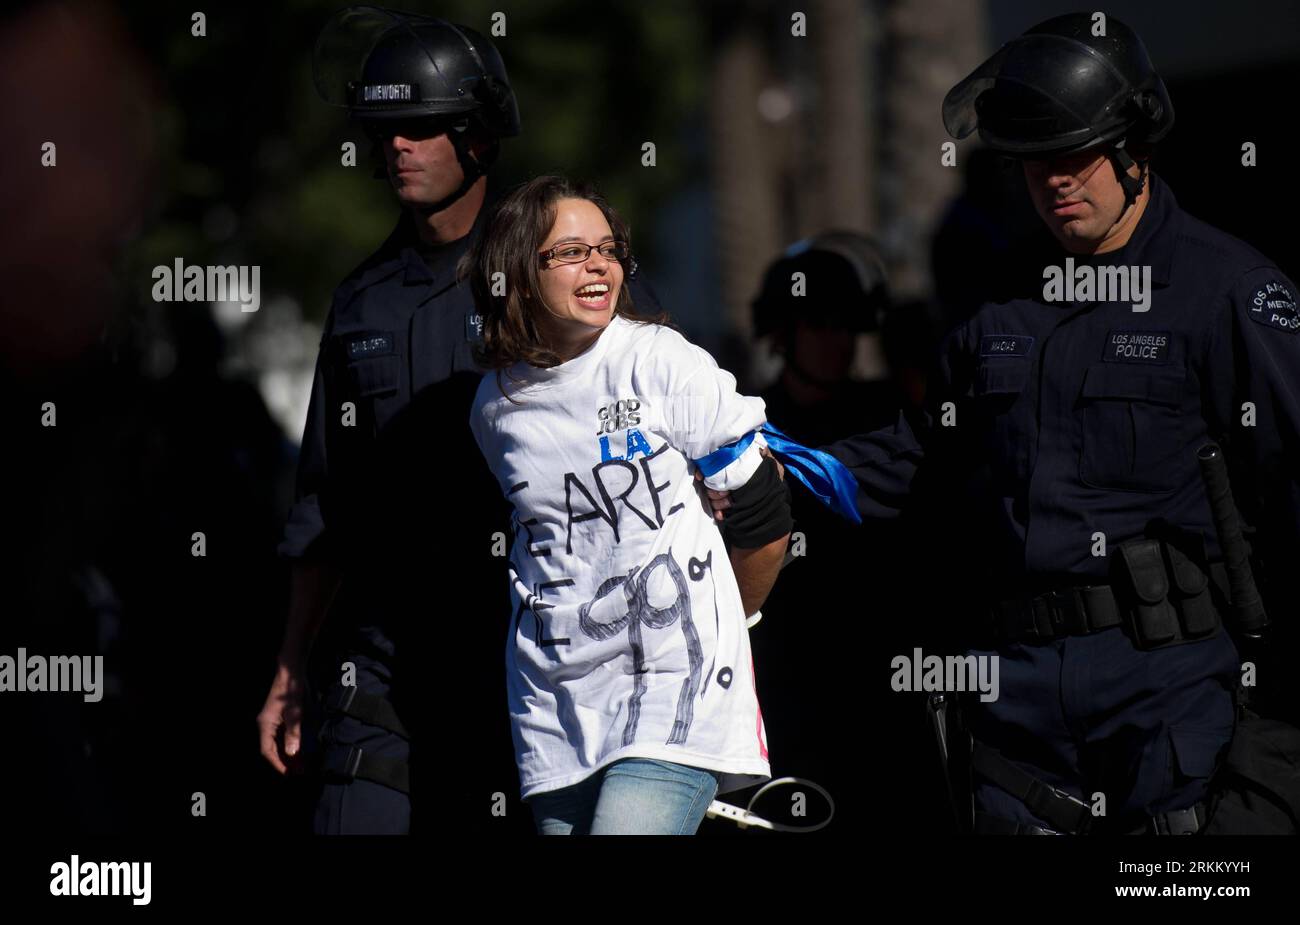 Bildnummer: 56292213  Datum: 17.11.2011  Copyright: imago/Xinhua (111117) -- LOS ANGELES, Nov. 17, 2011 (Xinhua) -- Policemen arrest a protestor in downtown Los Angeles, the United States, Nov. 17, 2011. The anti-Wall Street demonstration in the heart of the downtown Los Angeles financial district on Thursday morning ended after police arrested 23 who were part of those formed a circle and blocked an intersection in the city to show their strong will to tax more on the rich and hold Wall Street accountable for fixing the nation s economy. (Xinhua/Yang Lei) US-ANTI-WALL STREET-DEMONSTRATION PUB Stock Photo